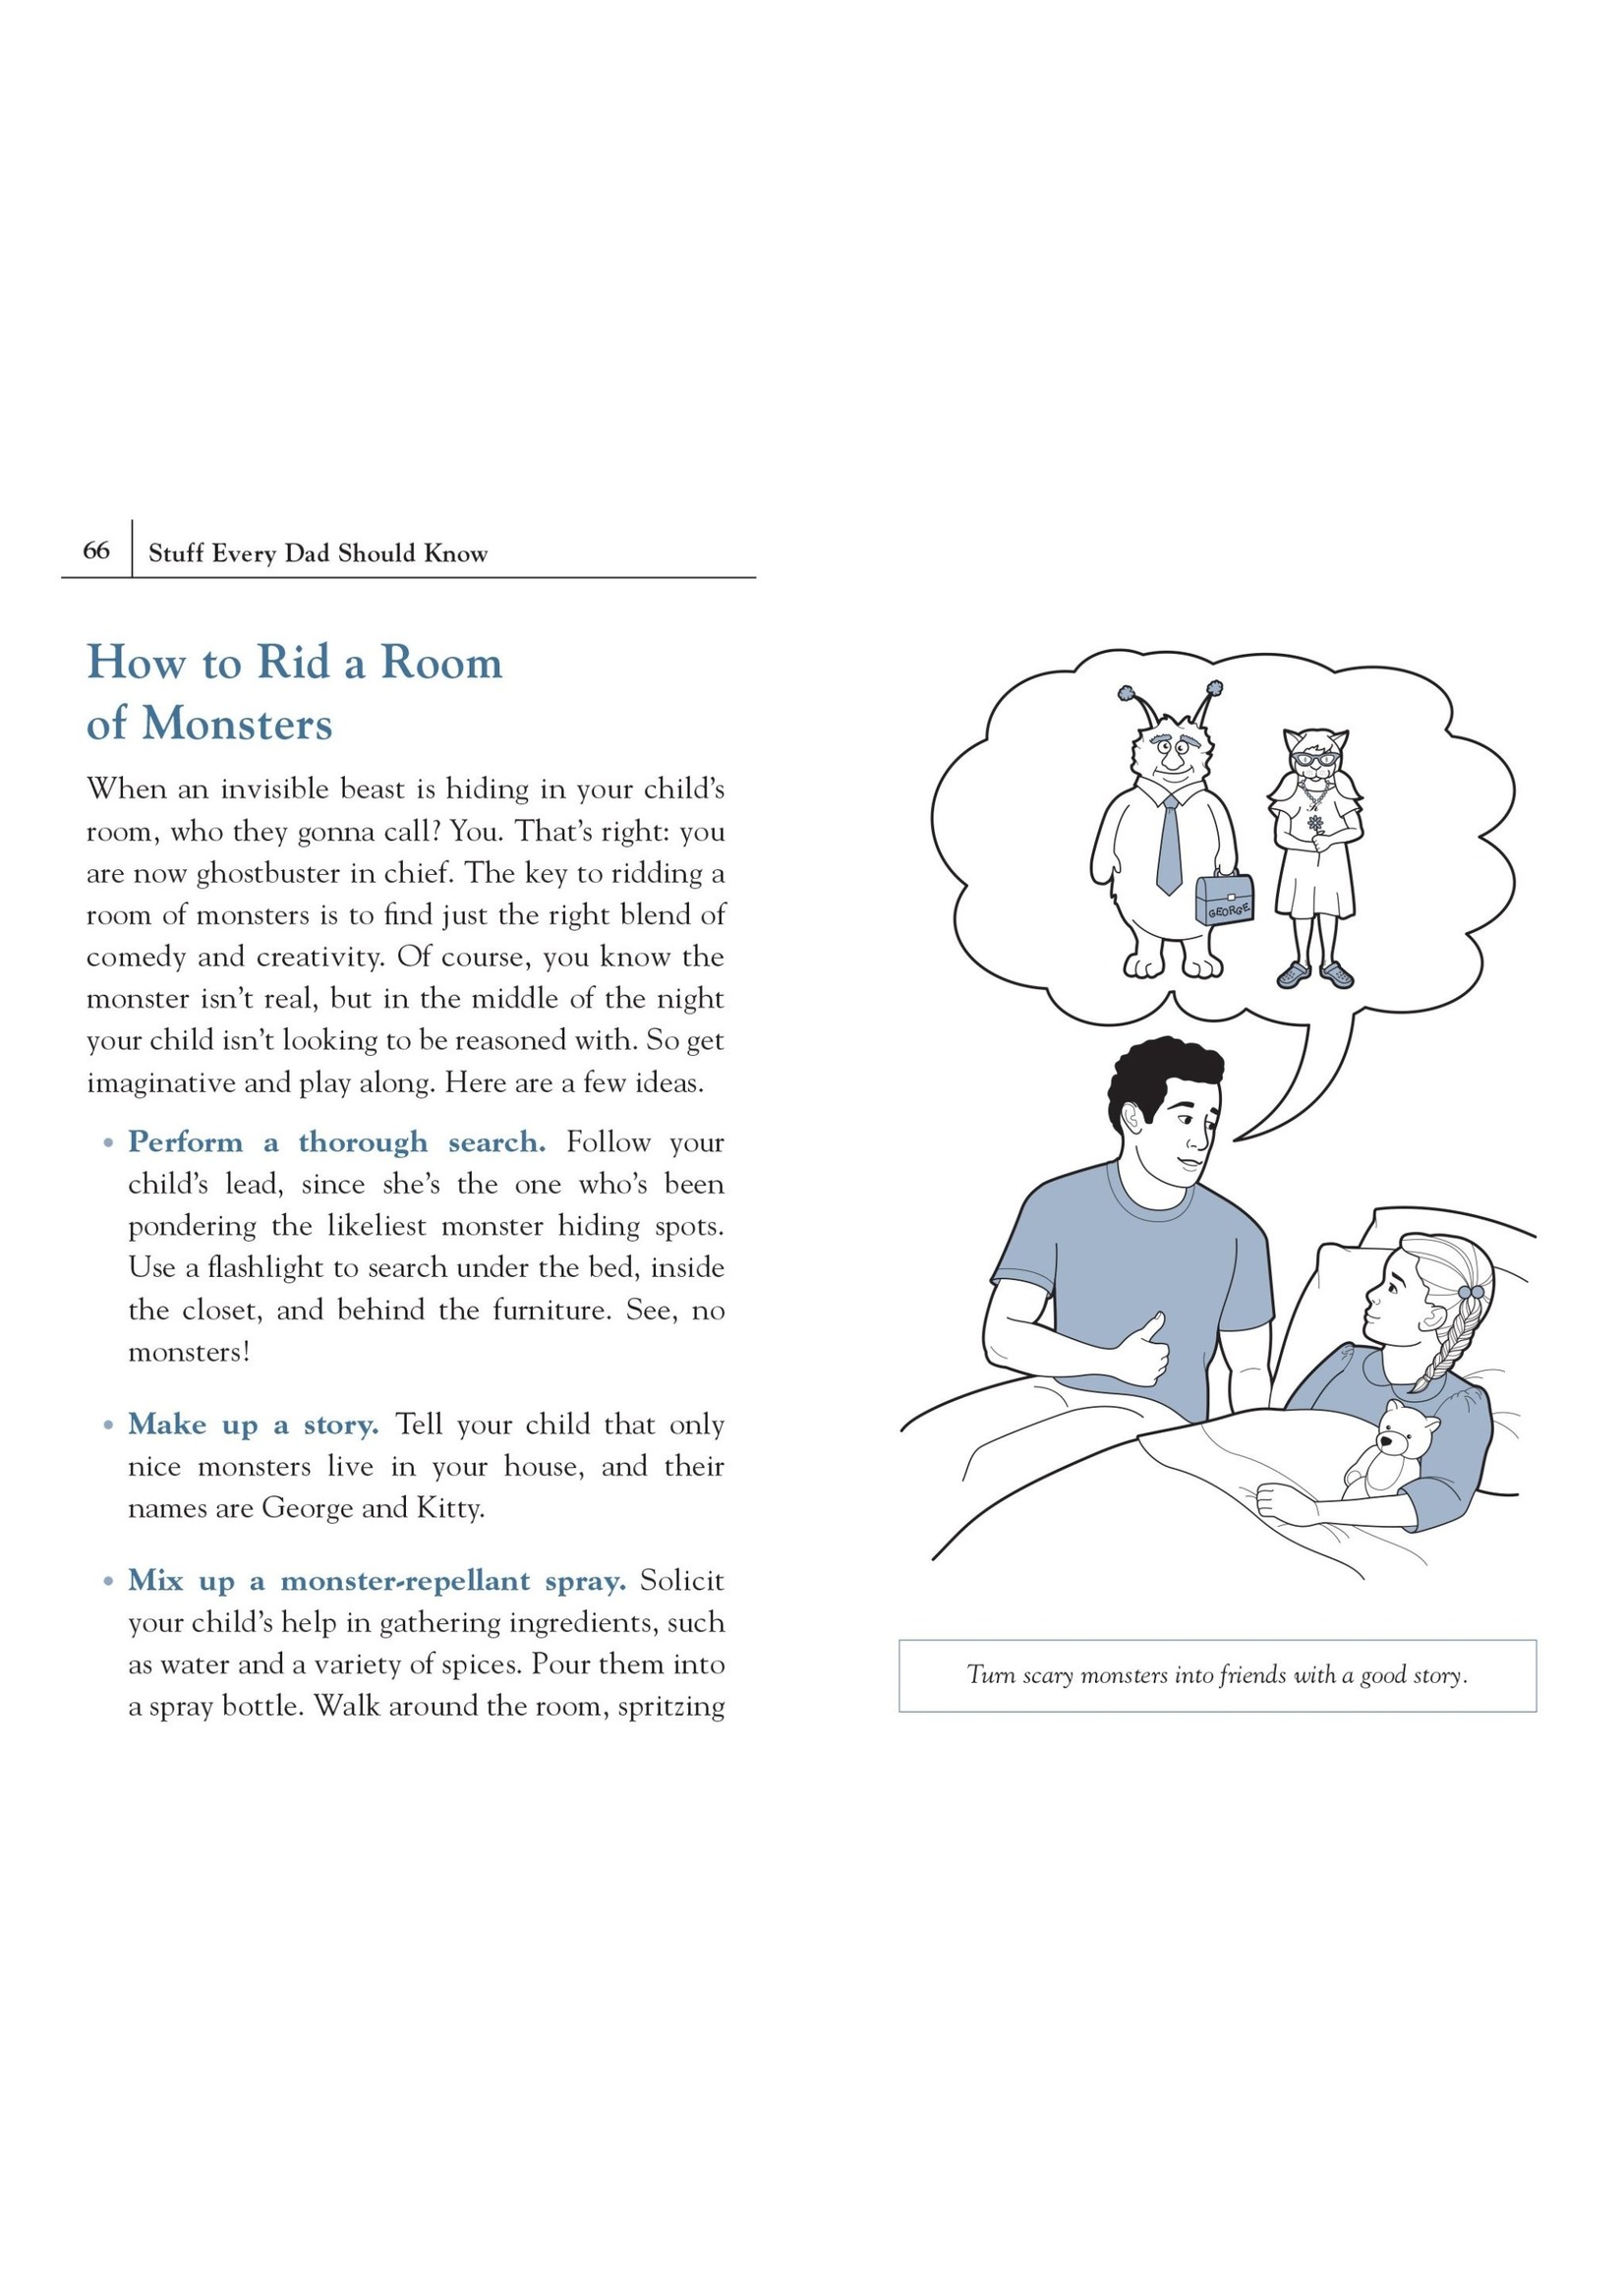 PENGUIN RANDOM HOUSE STUFF EVERY DAD SHOULD KNOW- BOOK